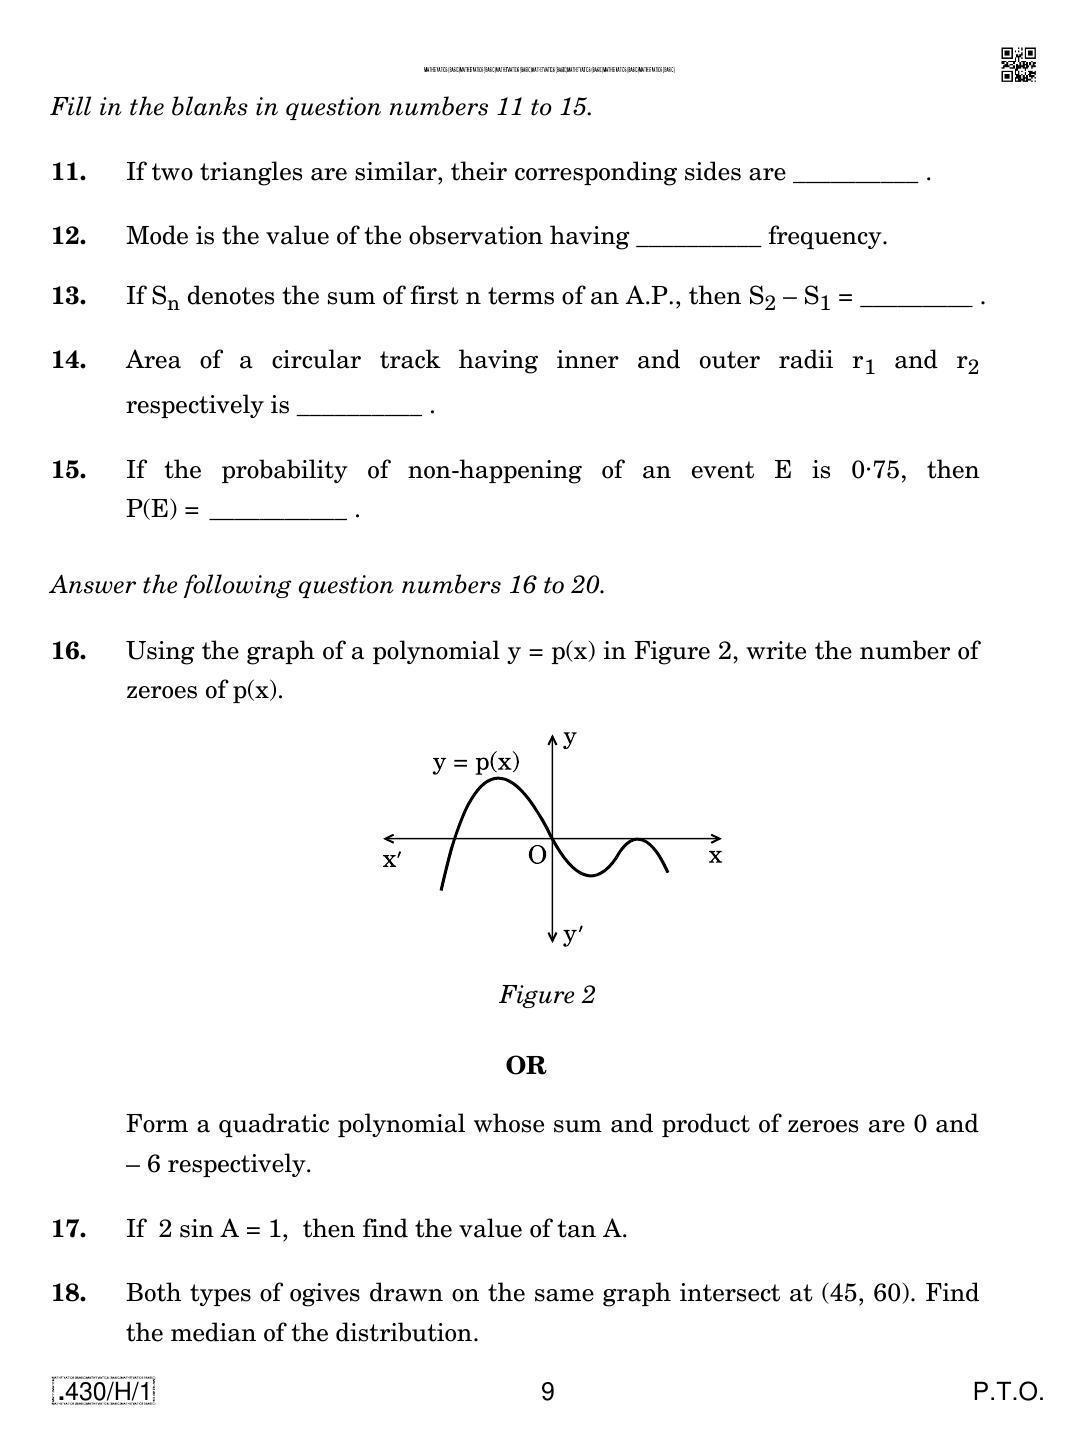 CBSE Class 10 430-C-1 - Maths (Basic) 2020 Compartment Question Paper - Page 9